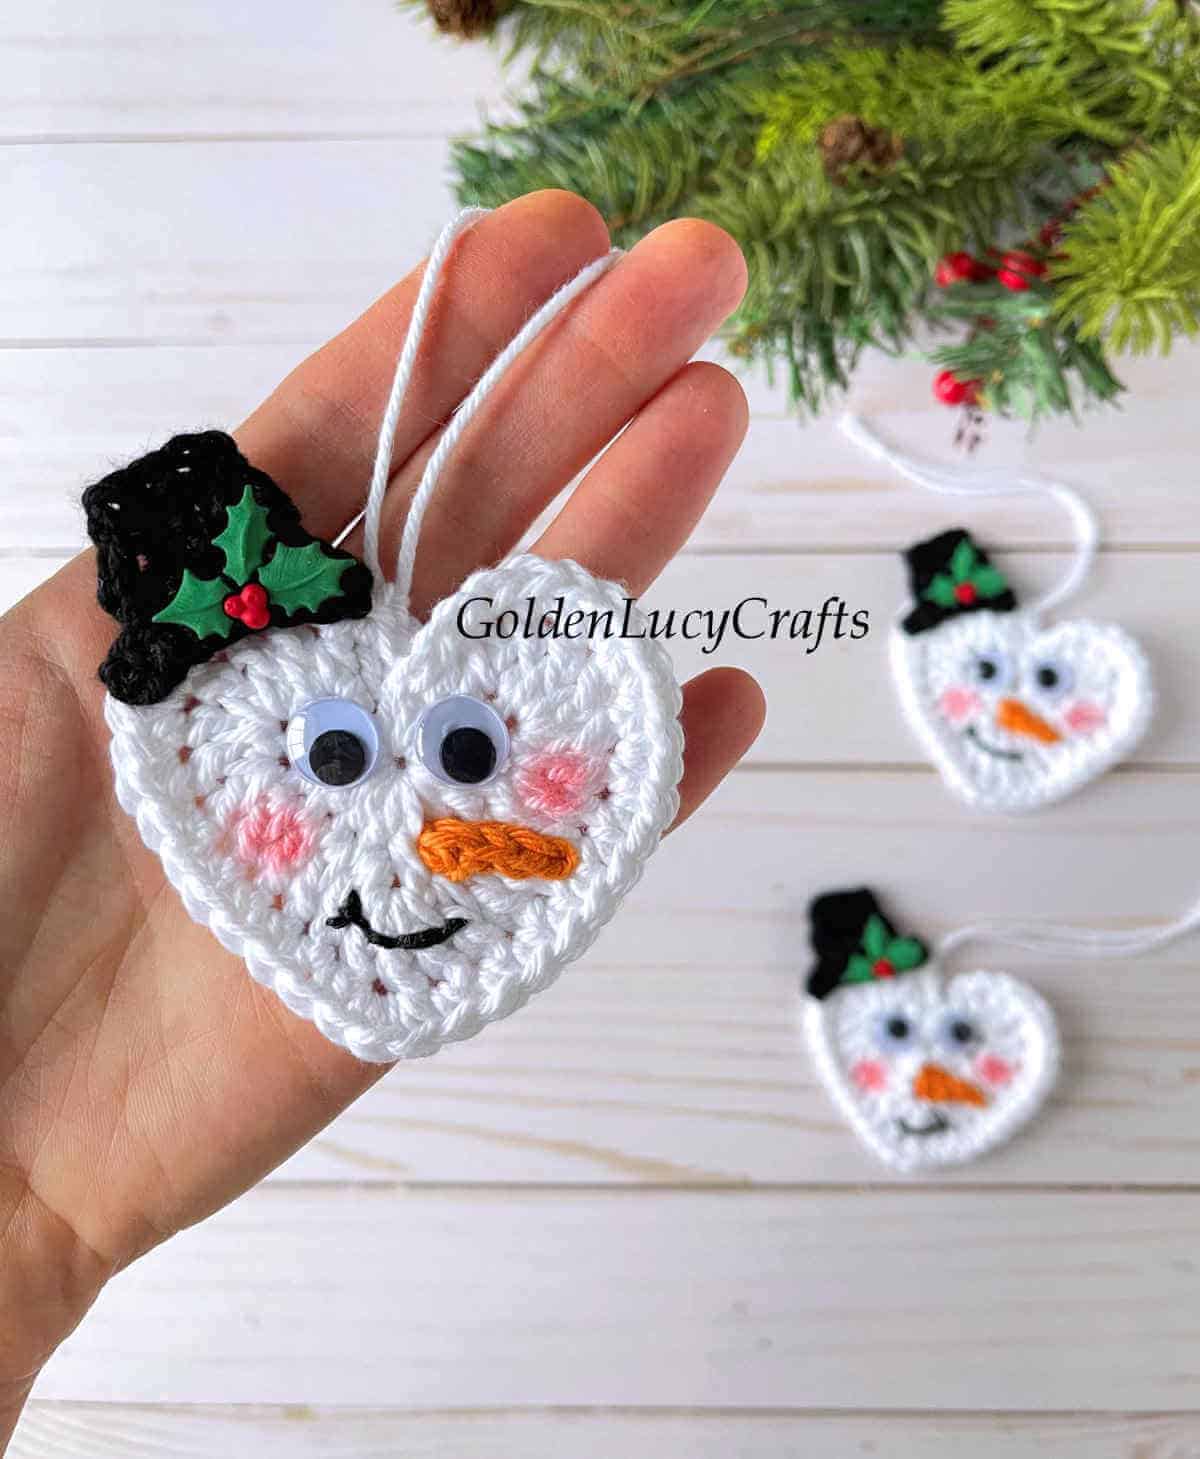 Crocheted heart snowman Christmas ornament in the palm of a hand.